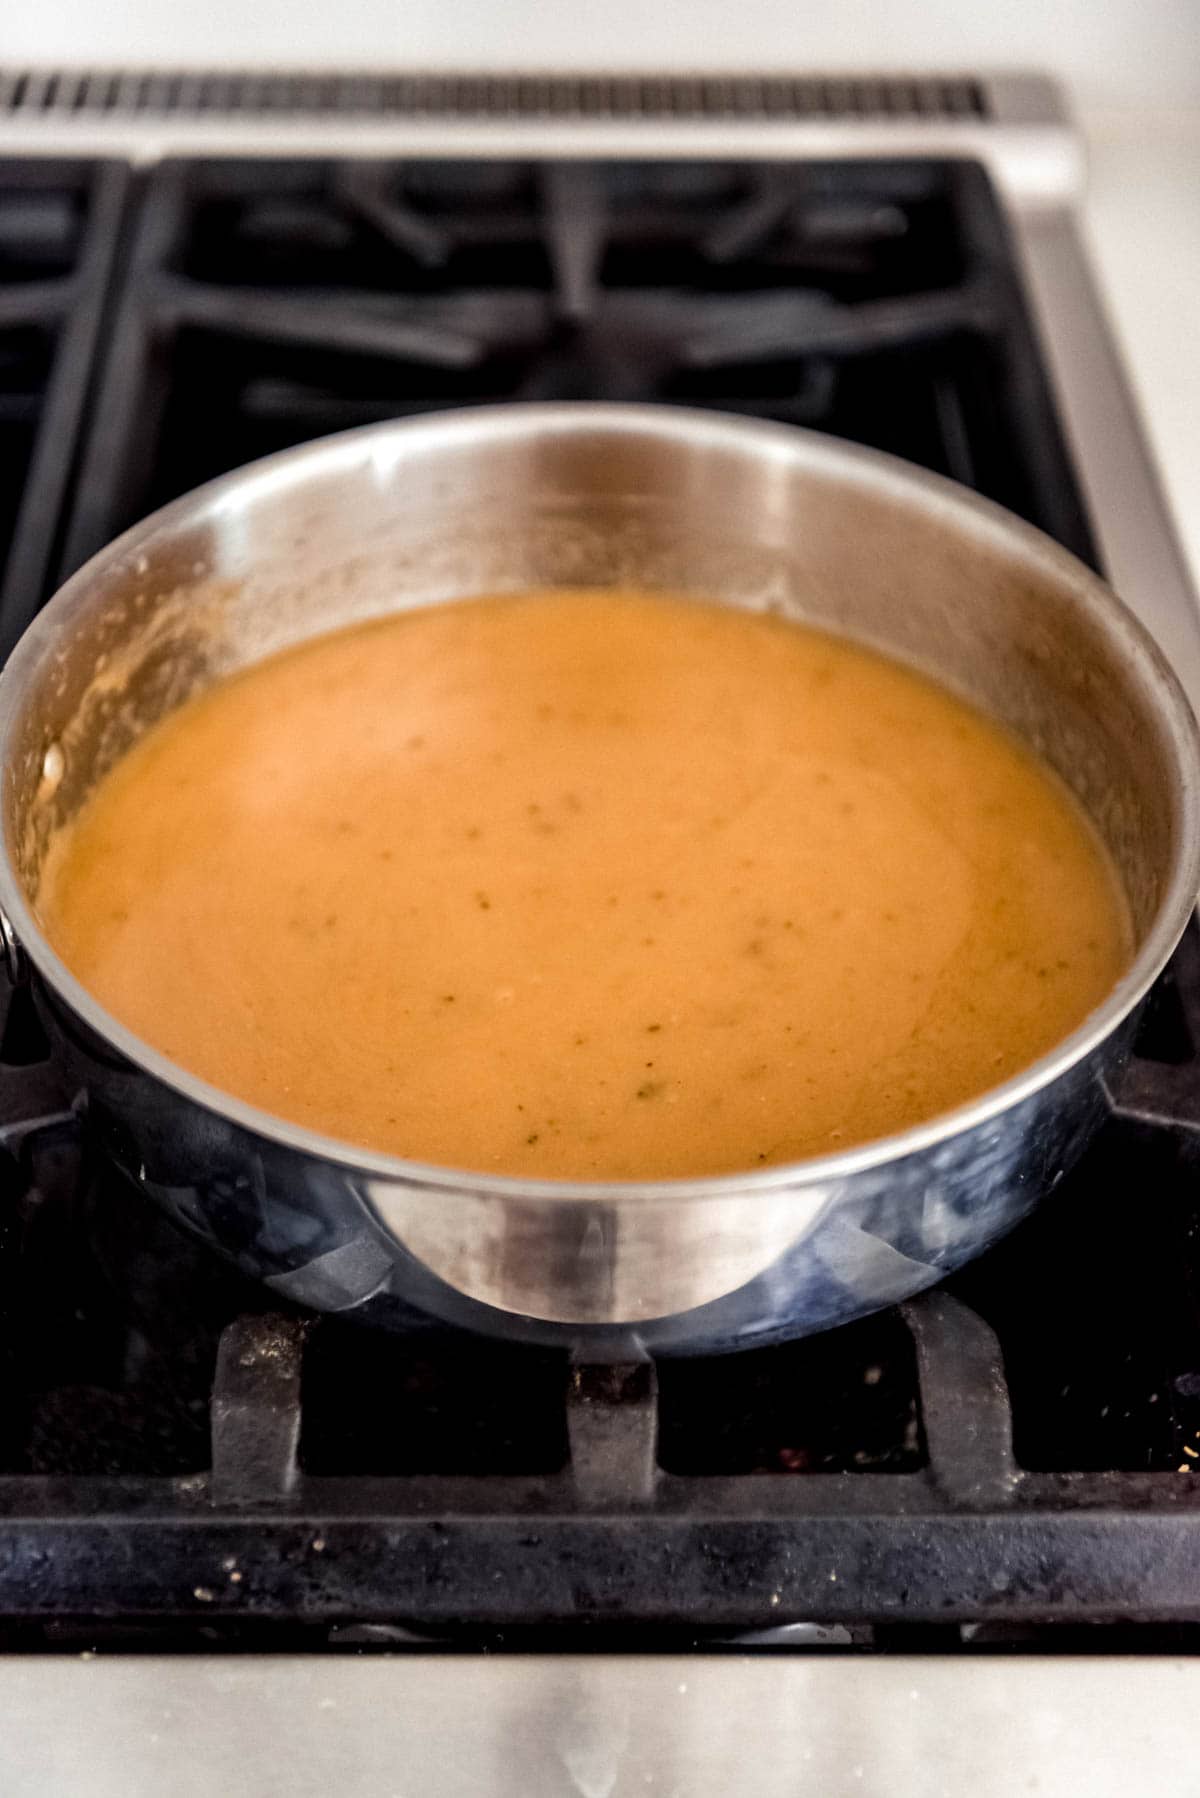 A pan on a stove with homemade gravy.